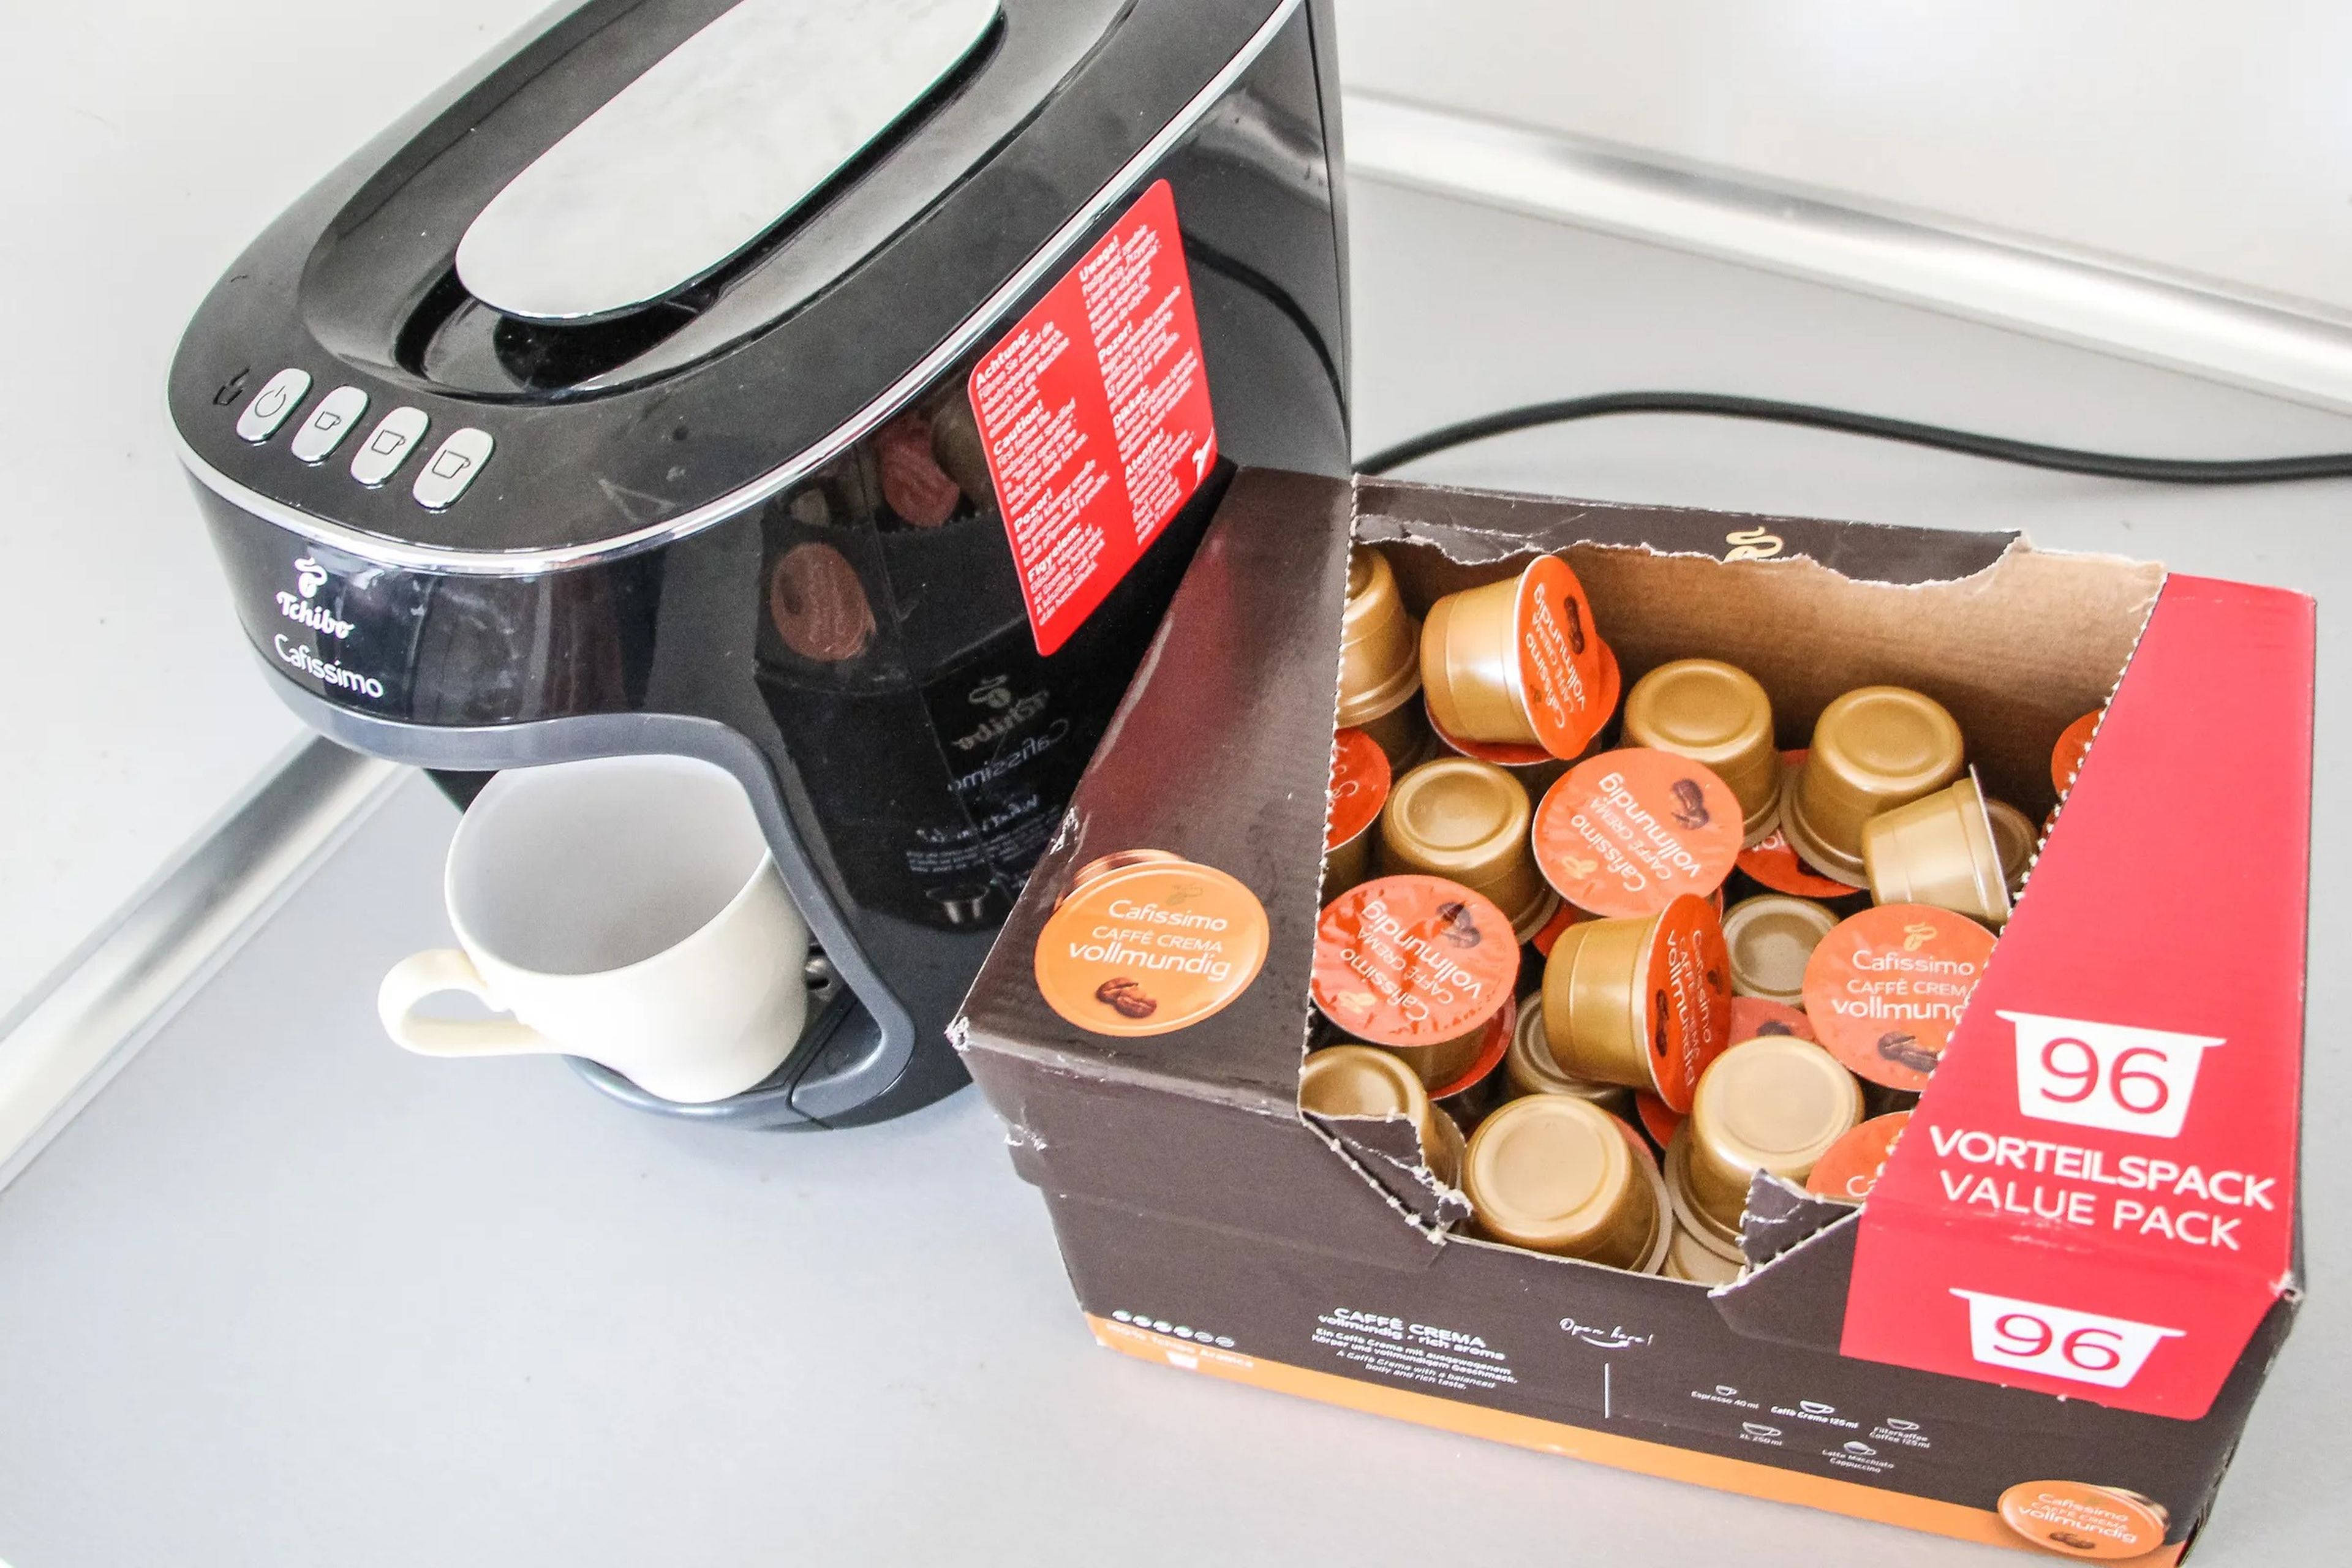 A box of single use coffee pods sits next to a coffee maker